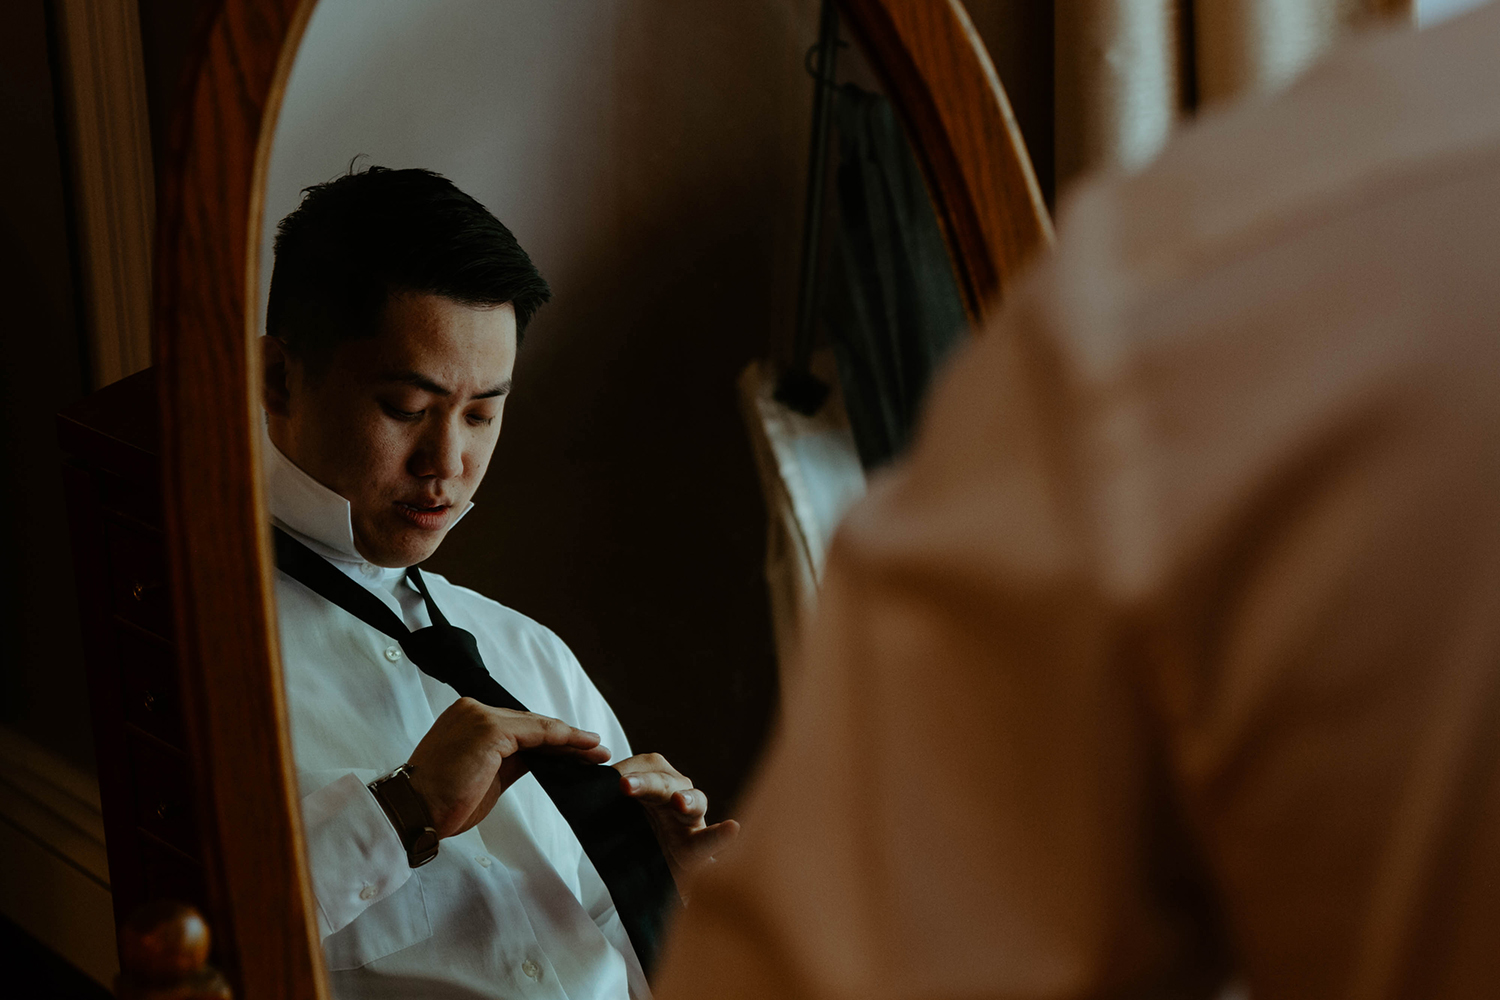 Groom getting ready before his wedding day ceremony in the woods.